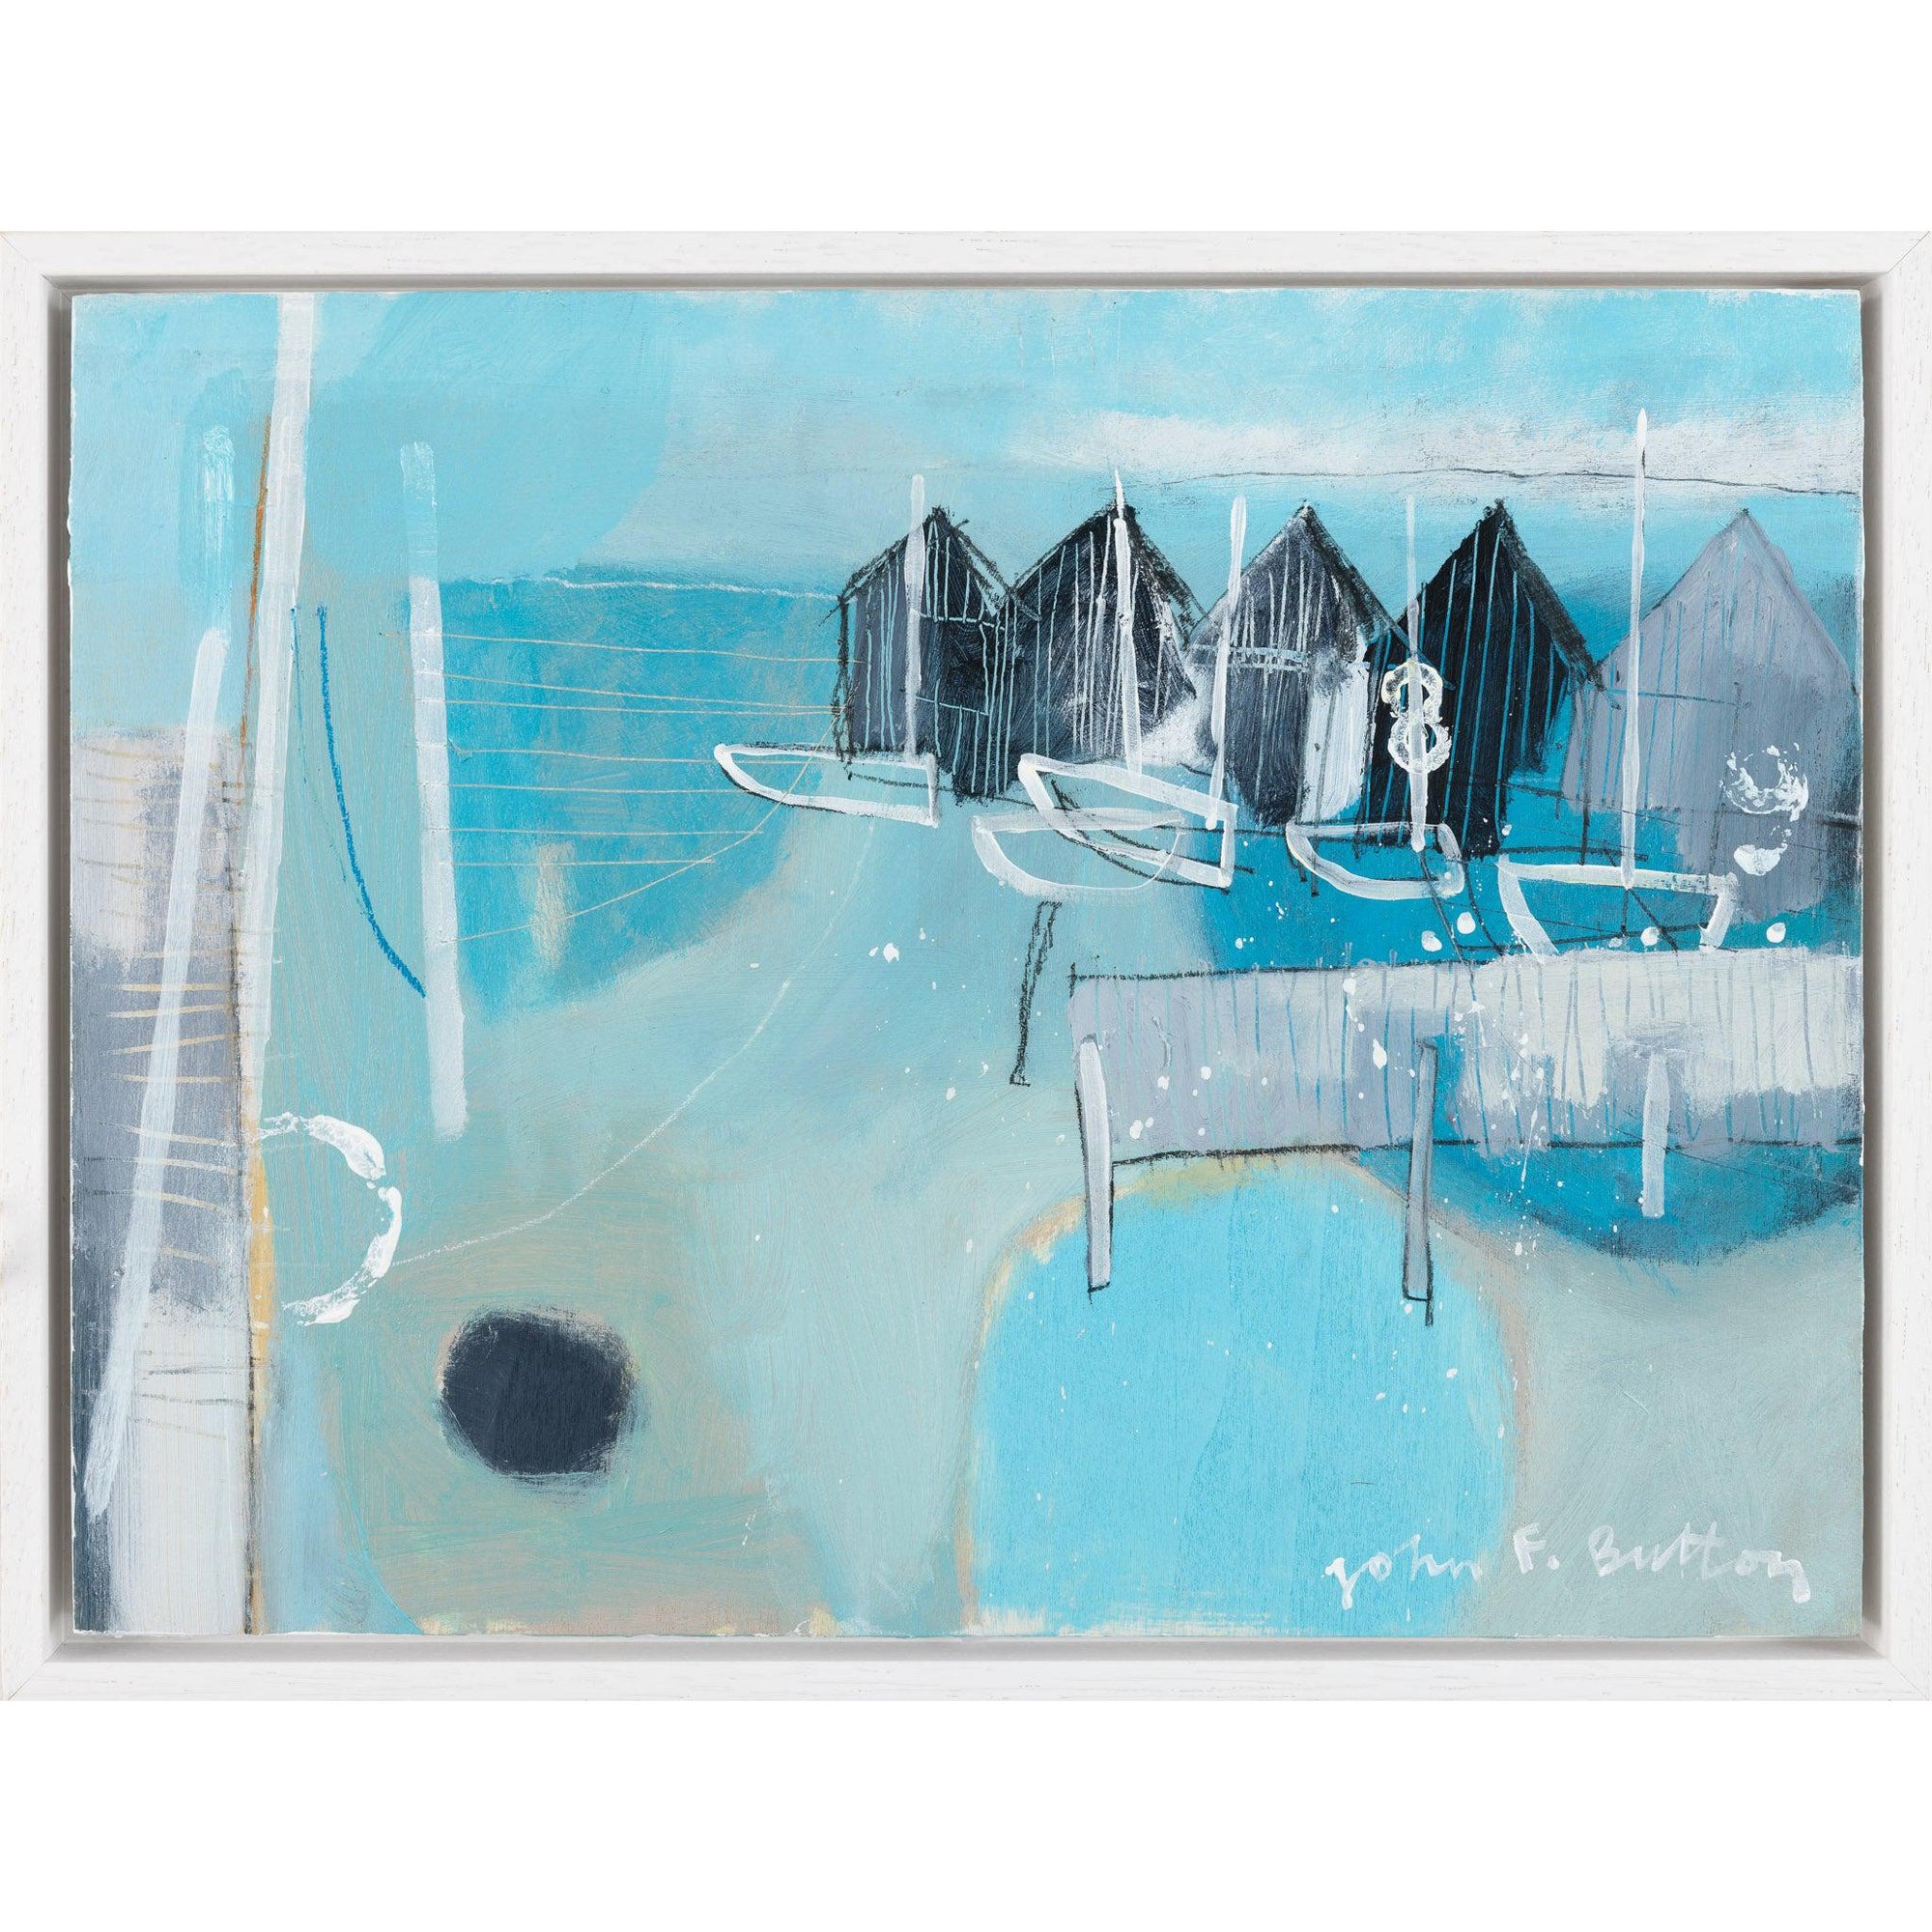 'Feeling blue' mixed media on board by John Button, available at Padstow Gallery, Cornwall